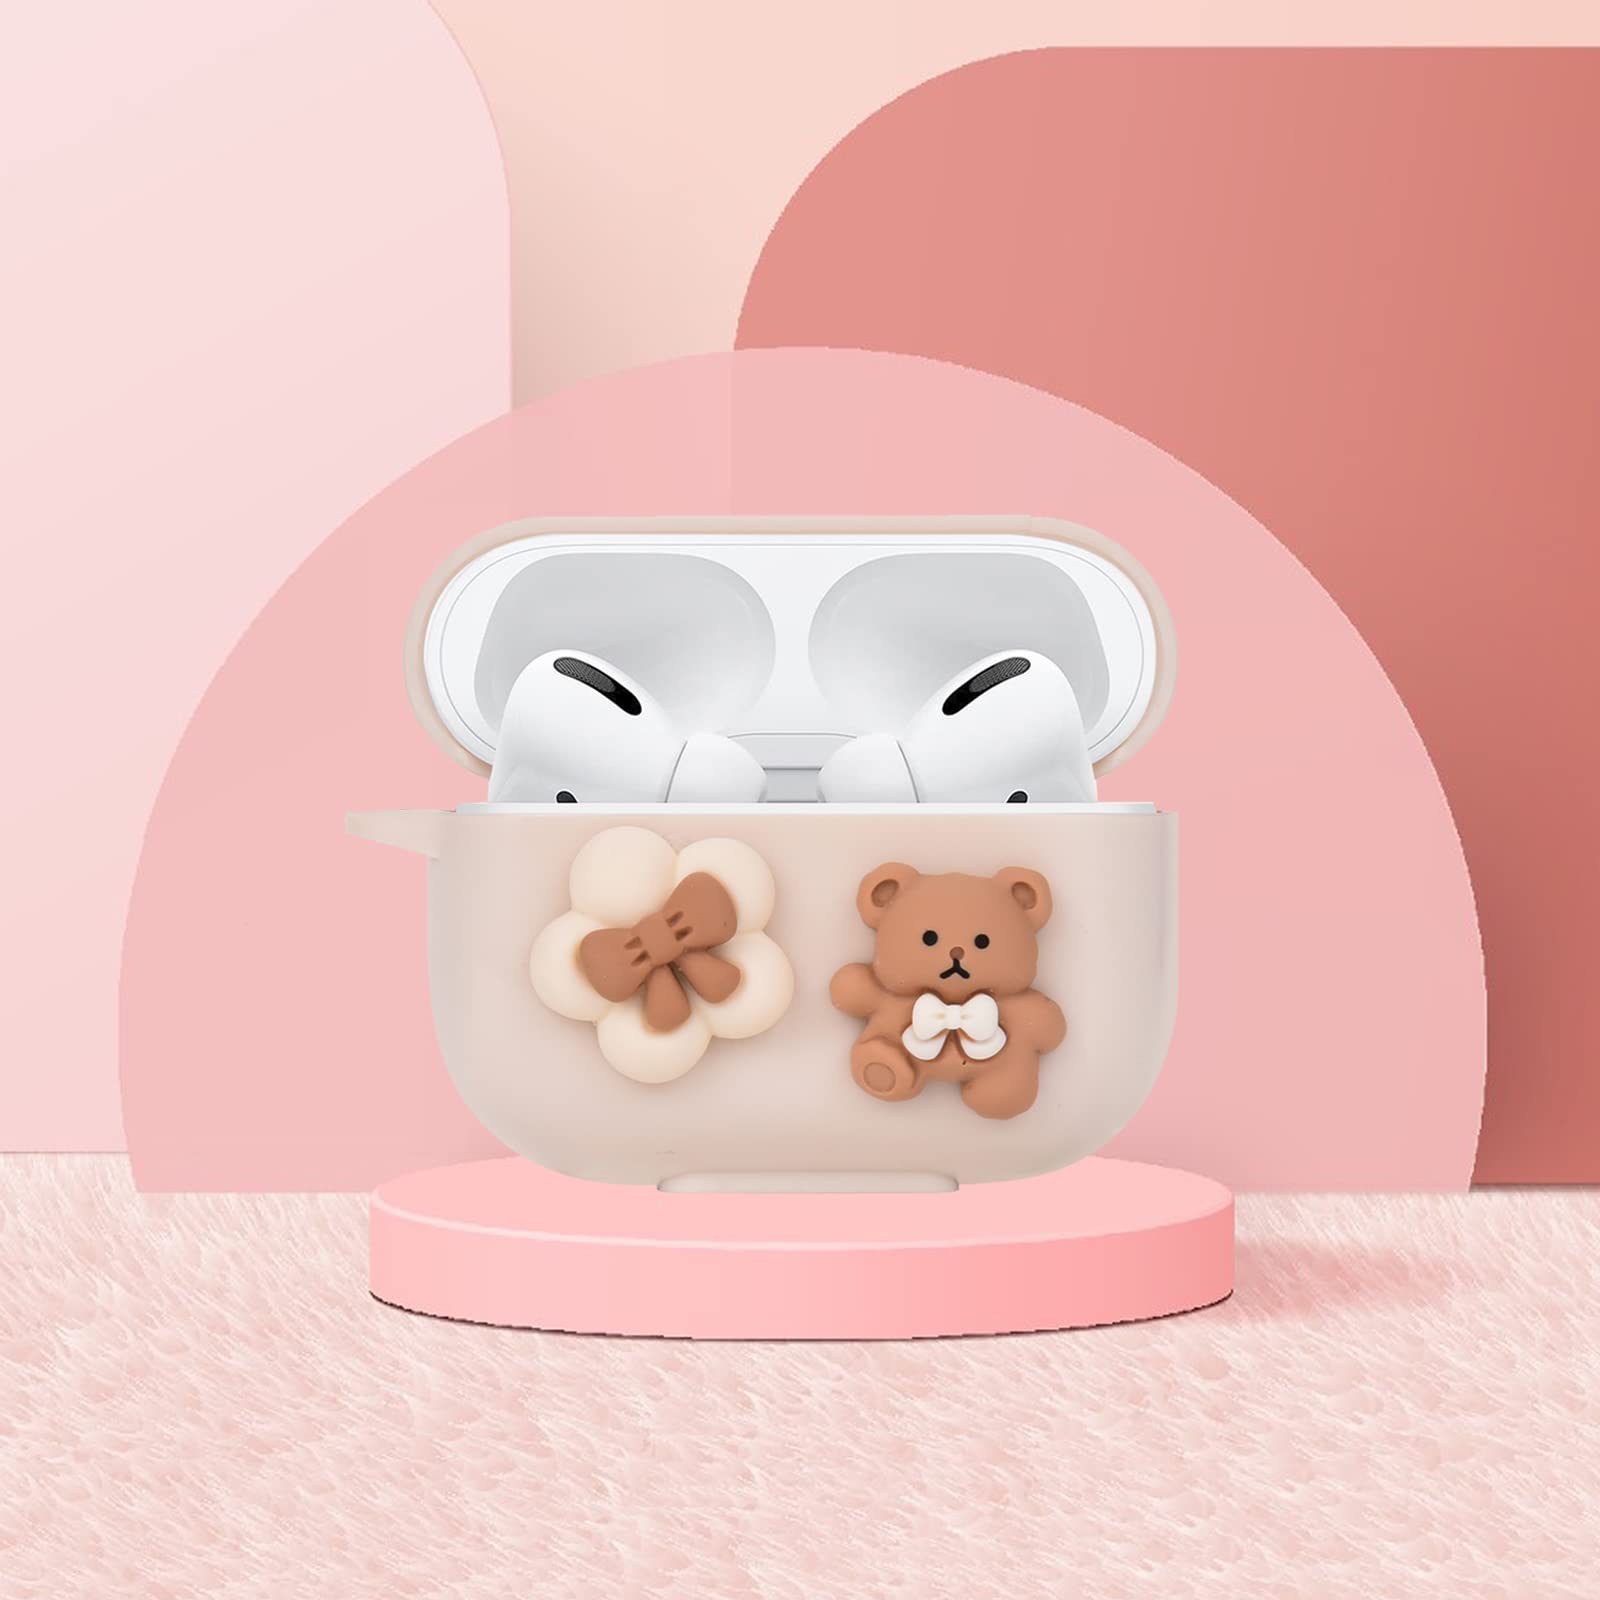 Cute AirPod Pro Case Cartoon Lovely Bear Design with Pearl Chain Soft Protective Cover Compatible with AirPods Pro for Women and Girls (Brown)